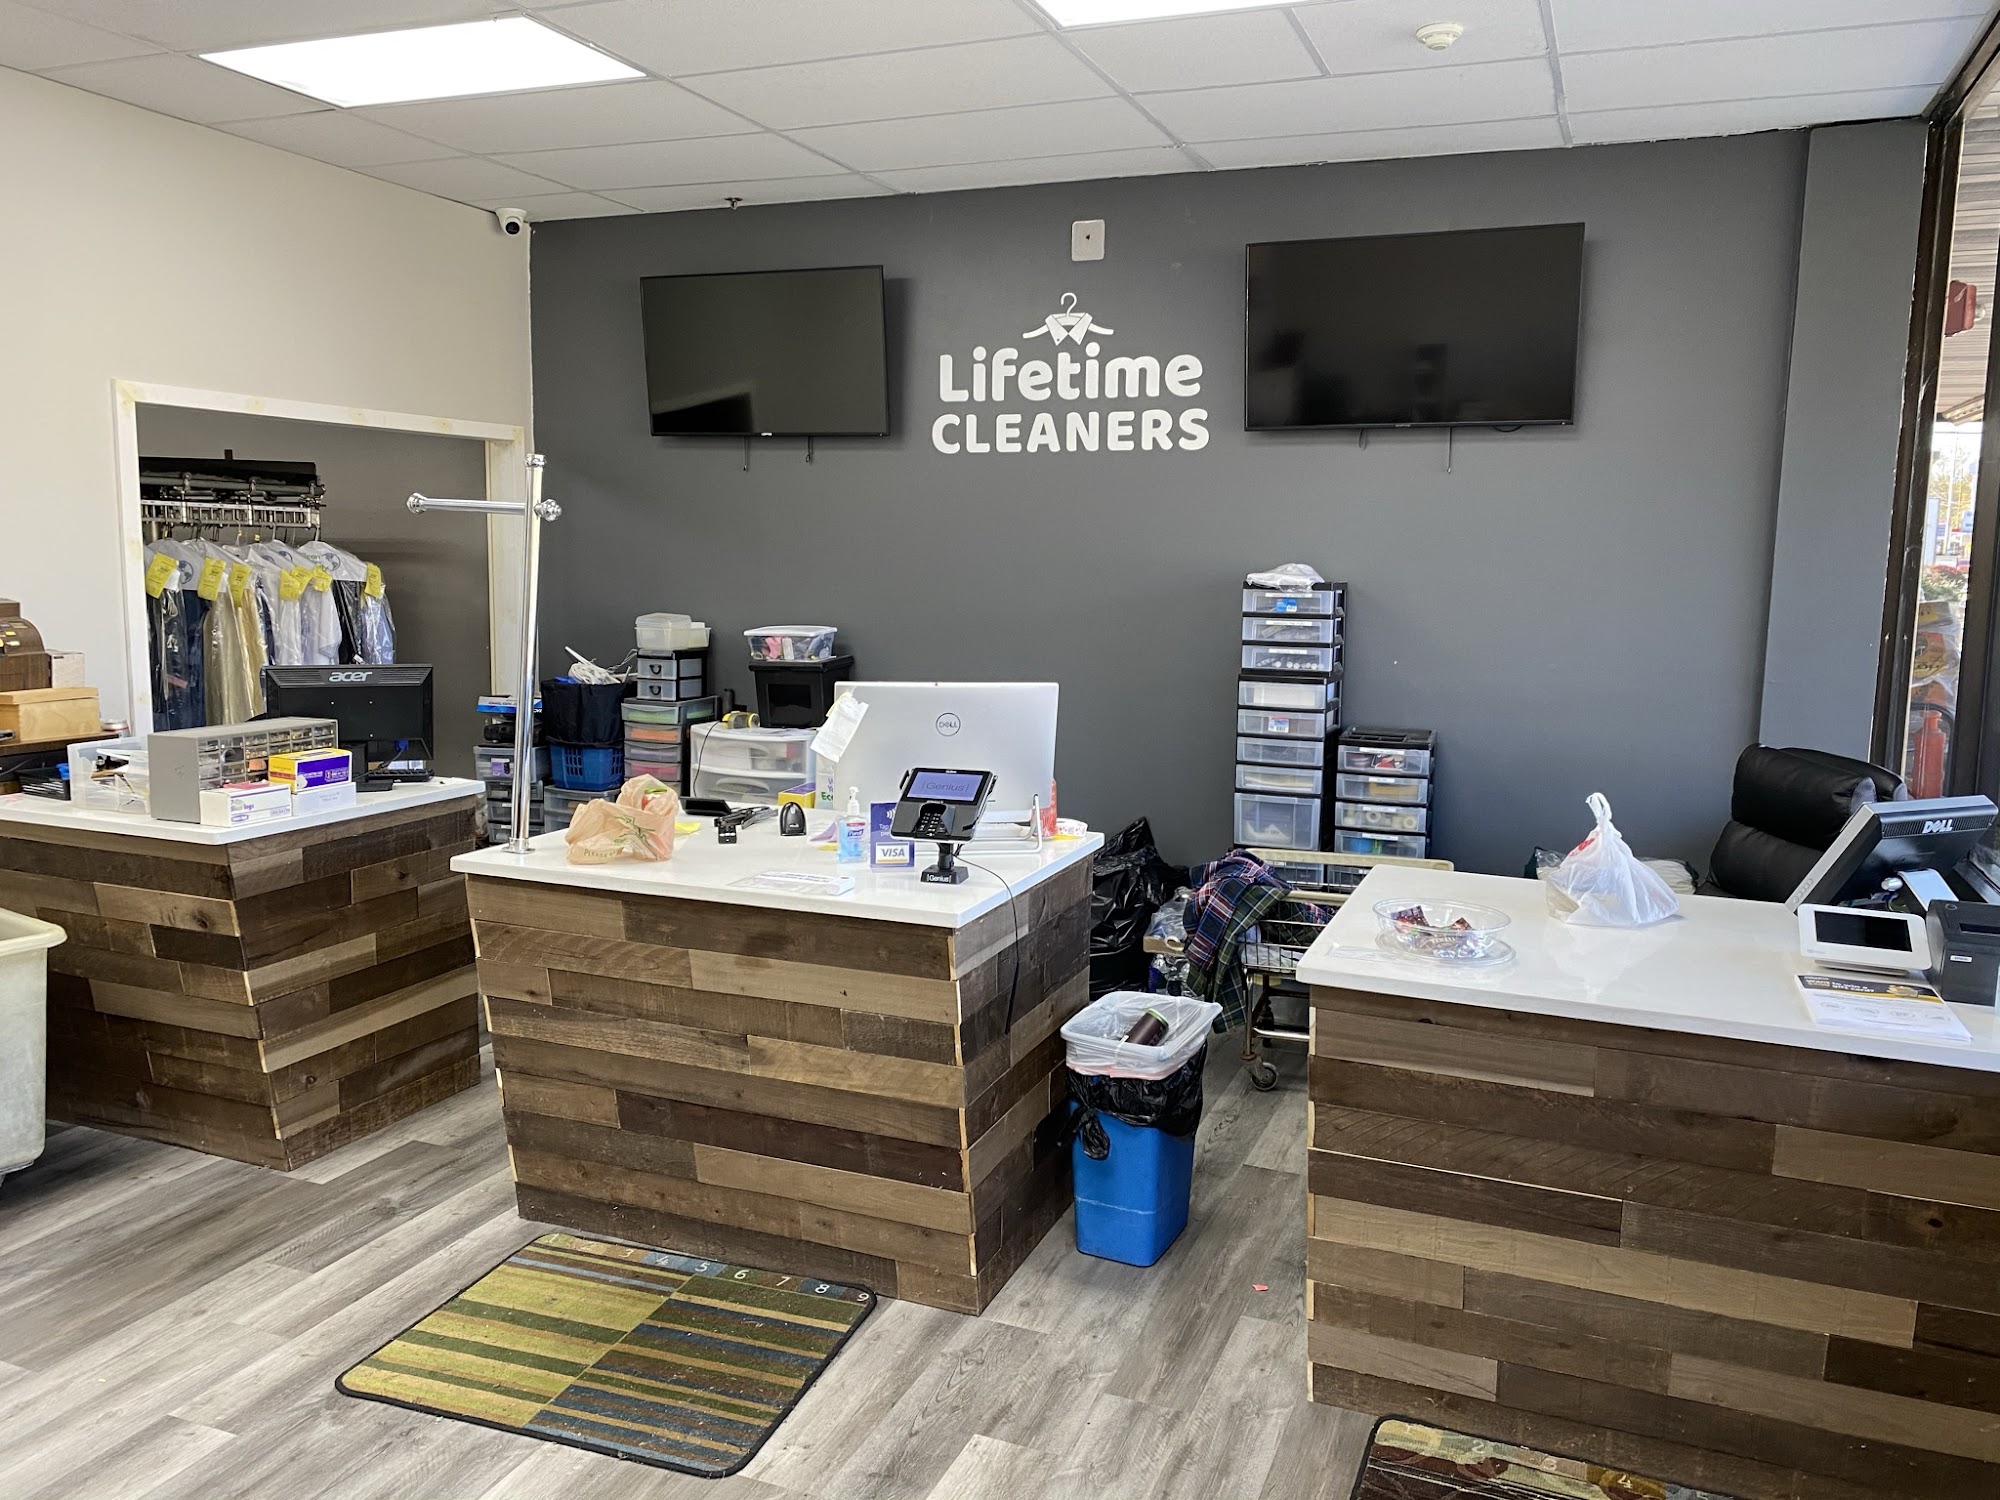 Lifetime Cleaners 1278 Bound Brook Rd, Middlesex New Jersey 08846